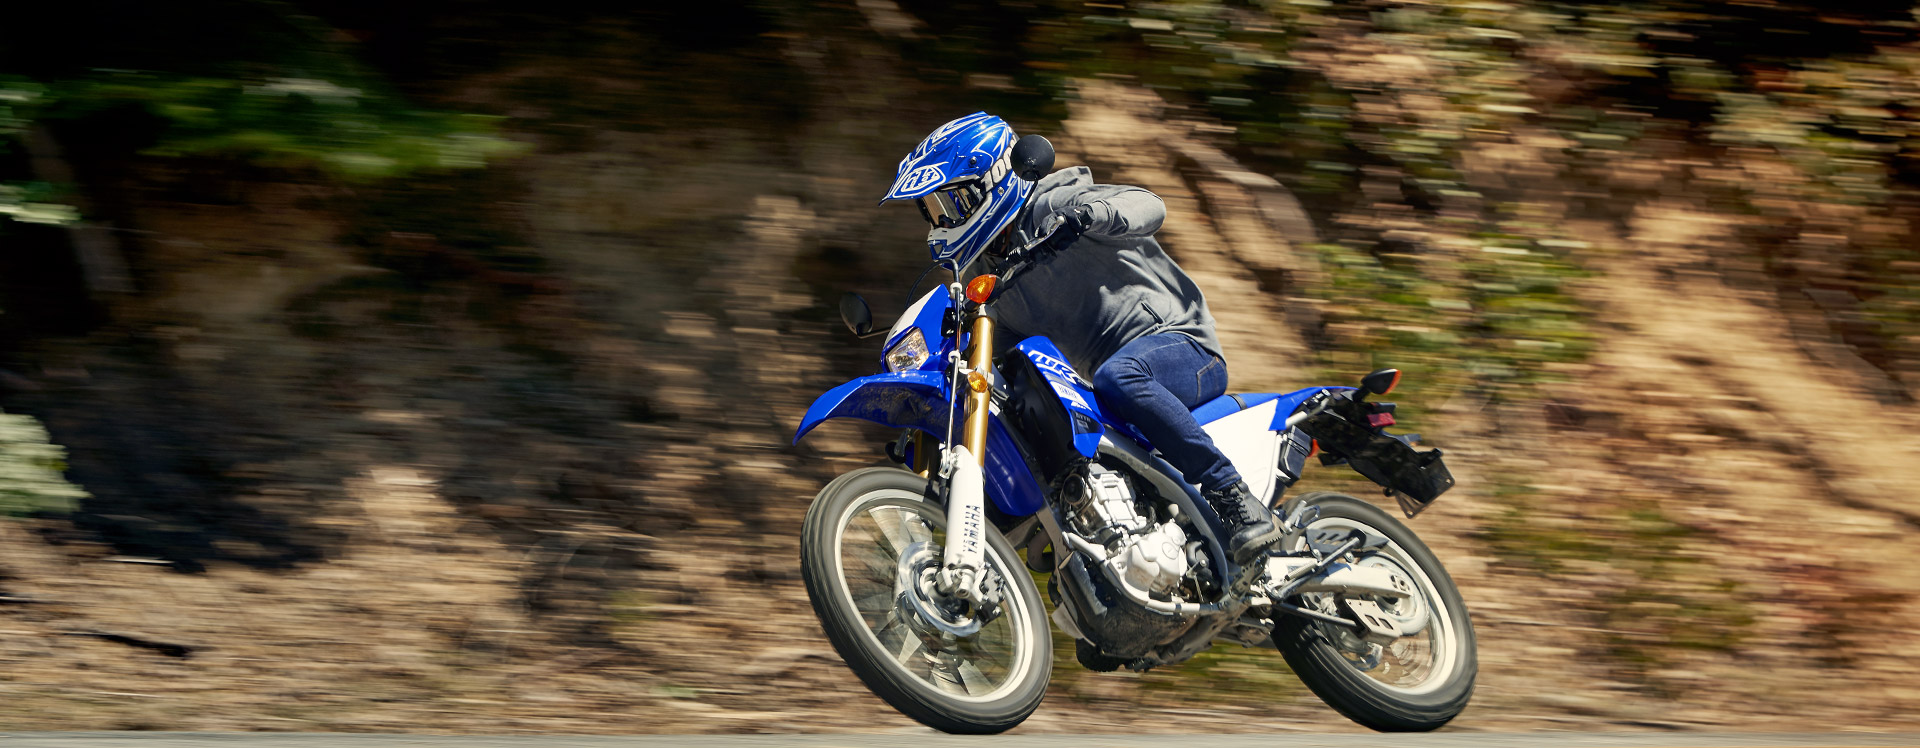 Yamaha Wr250r Dual Sport Motorcycle Model Home